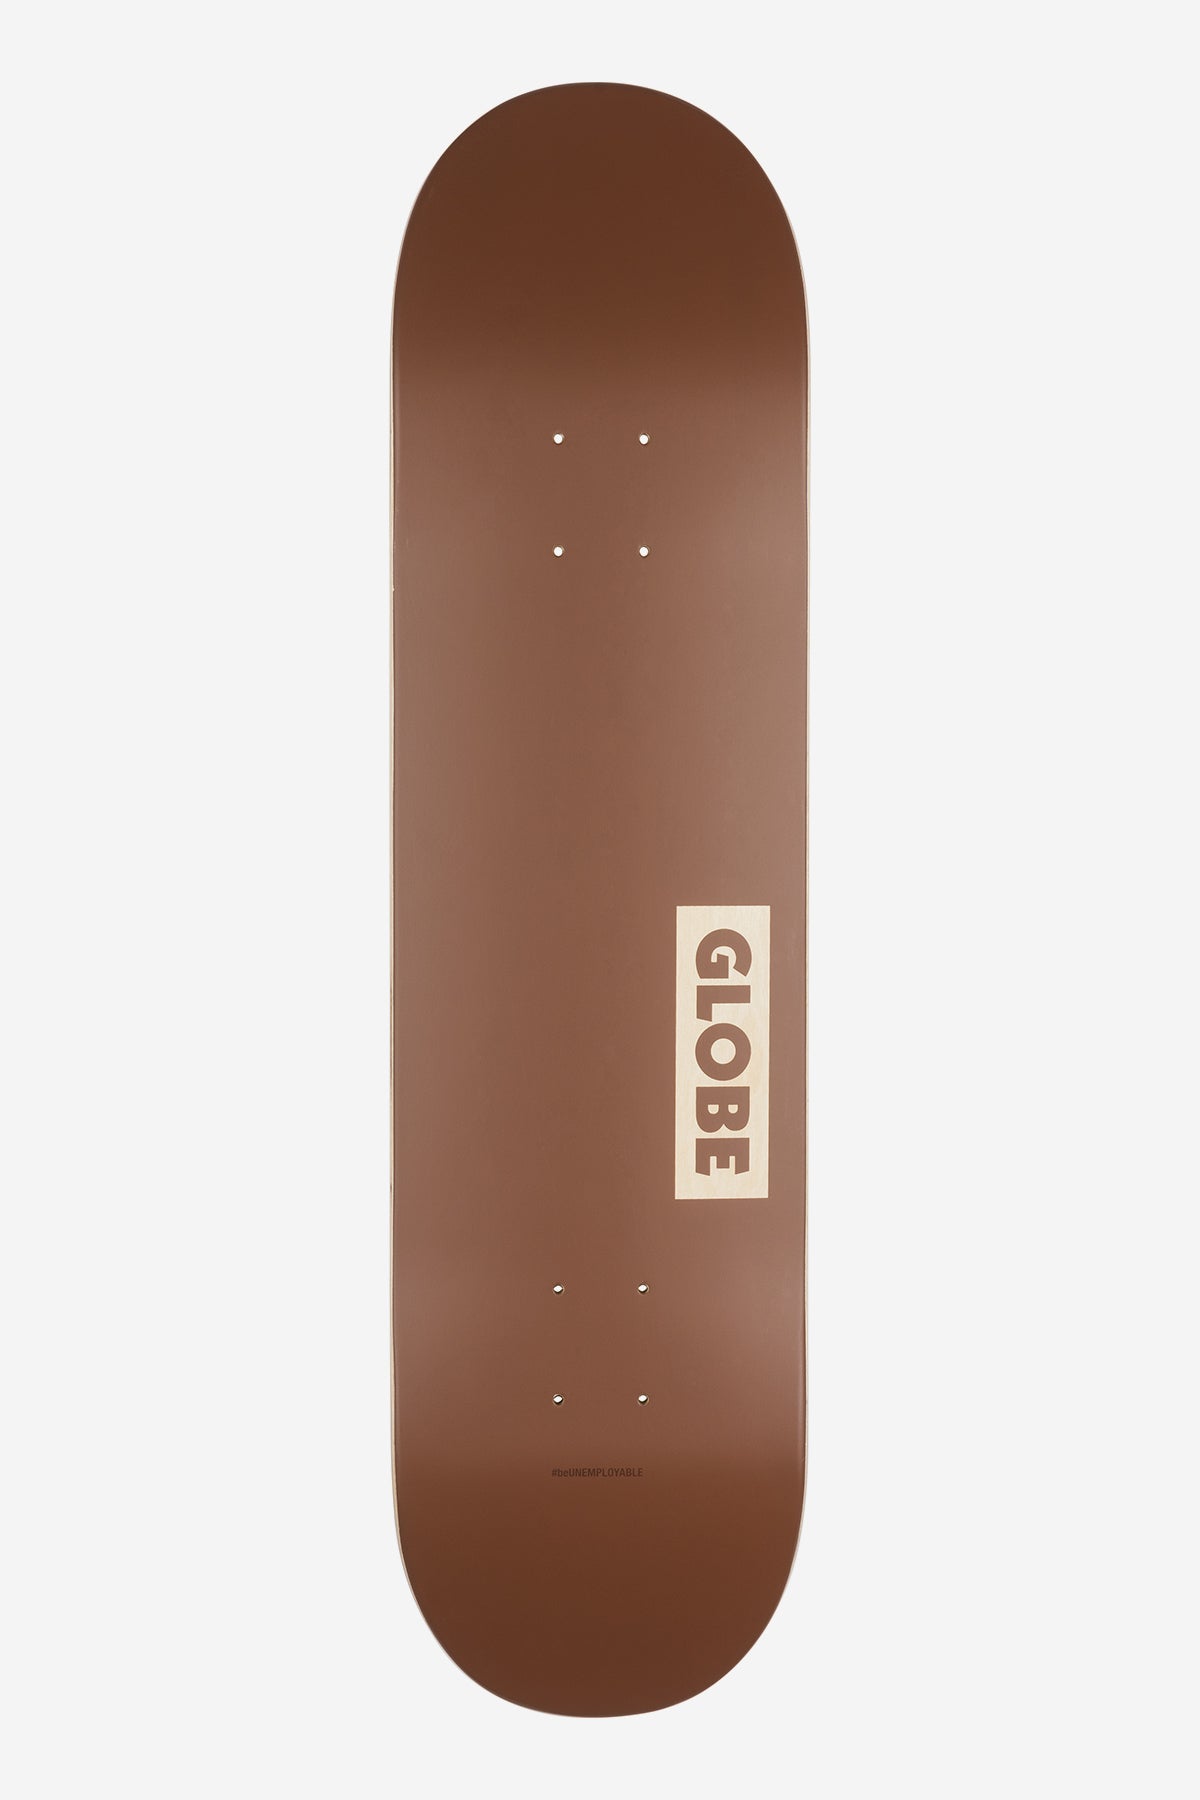 bottom view of the Goodstock 8.5" Deck